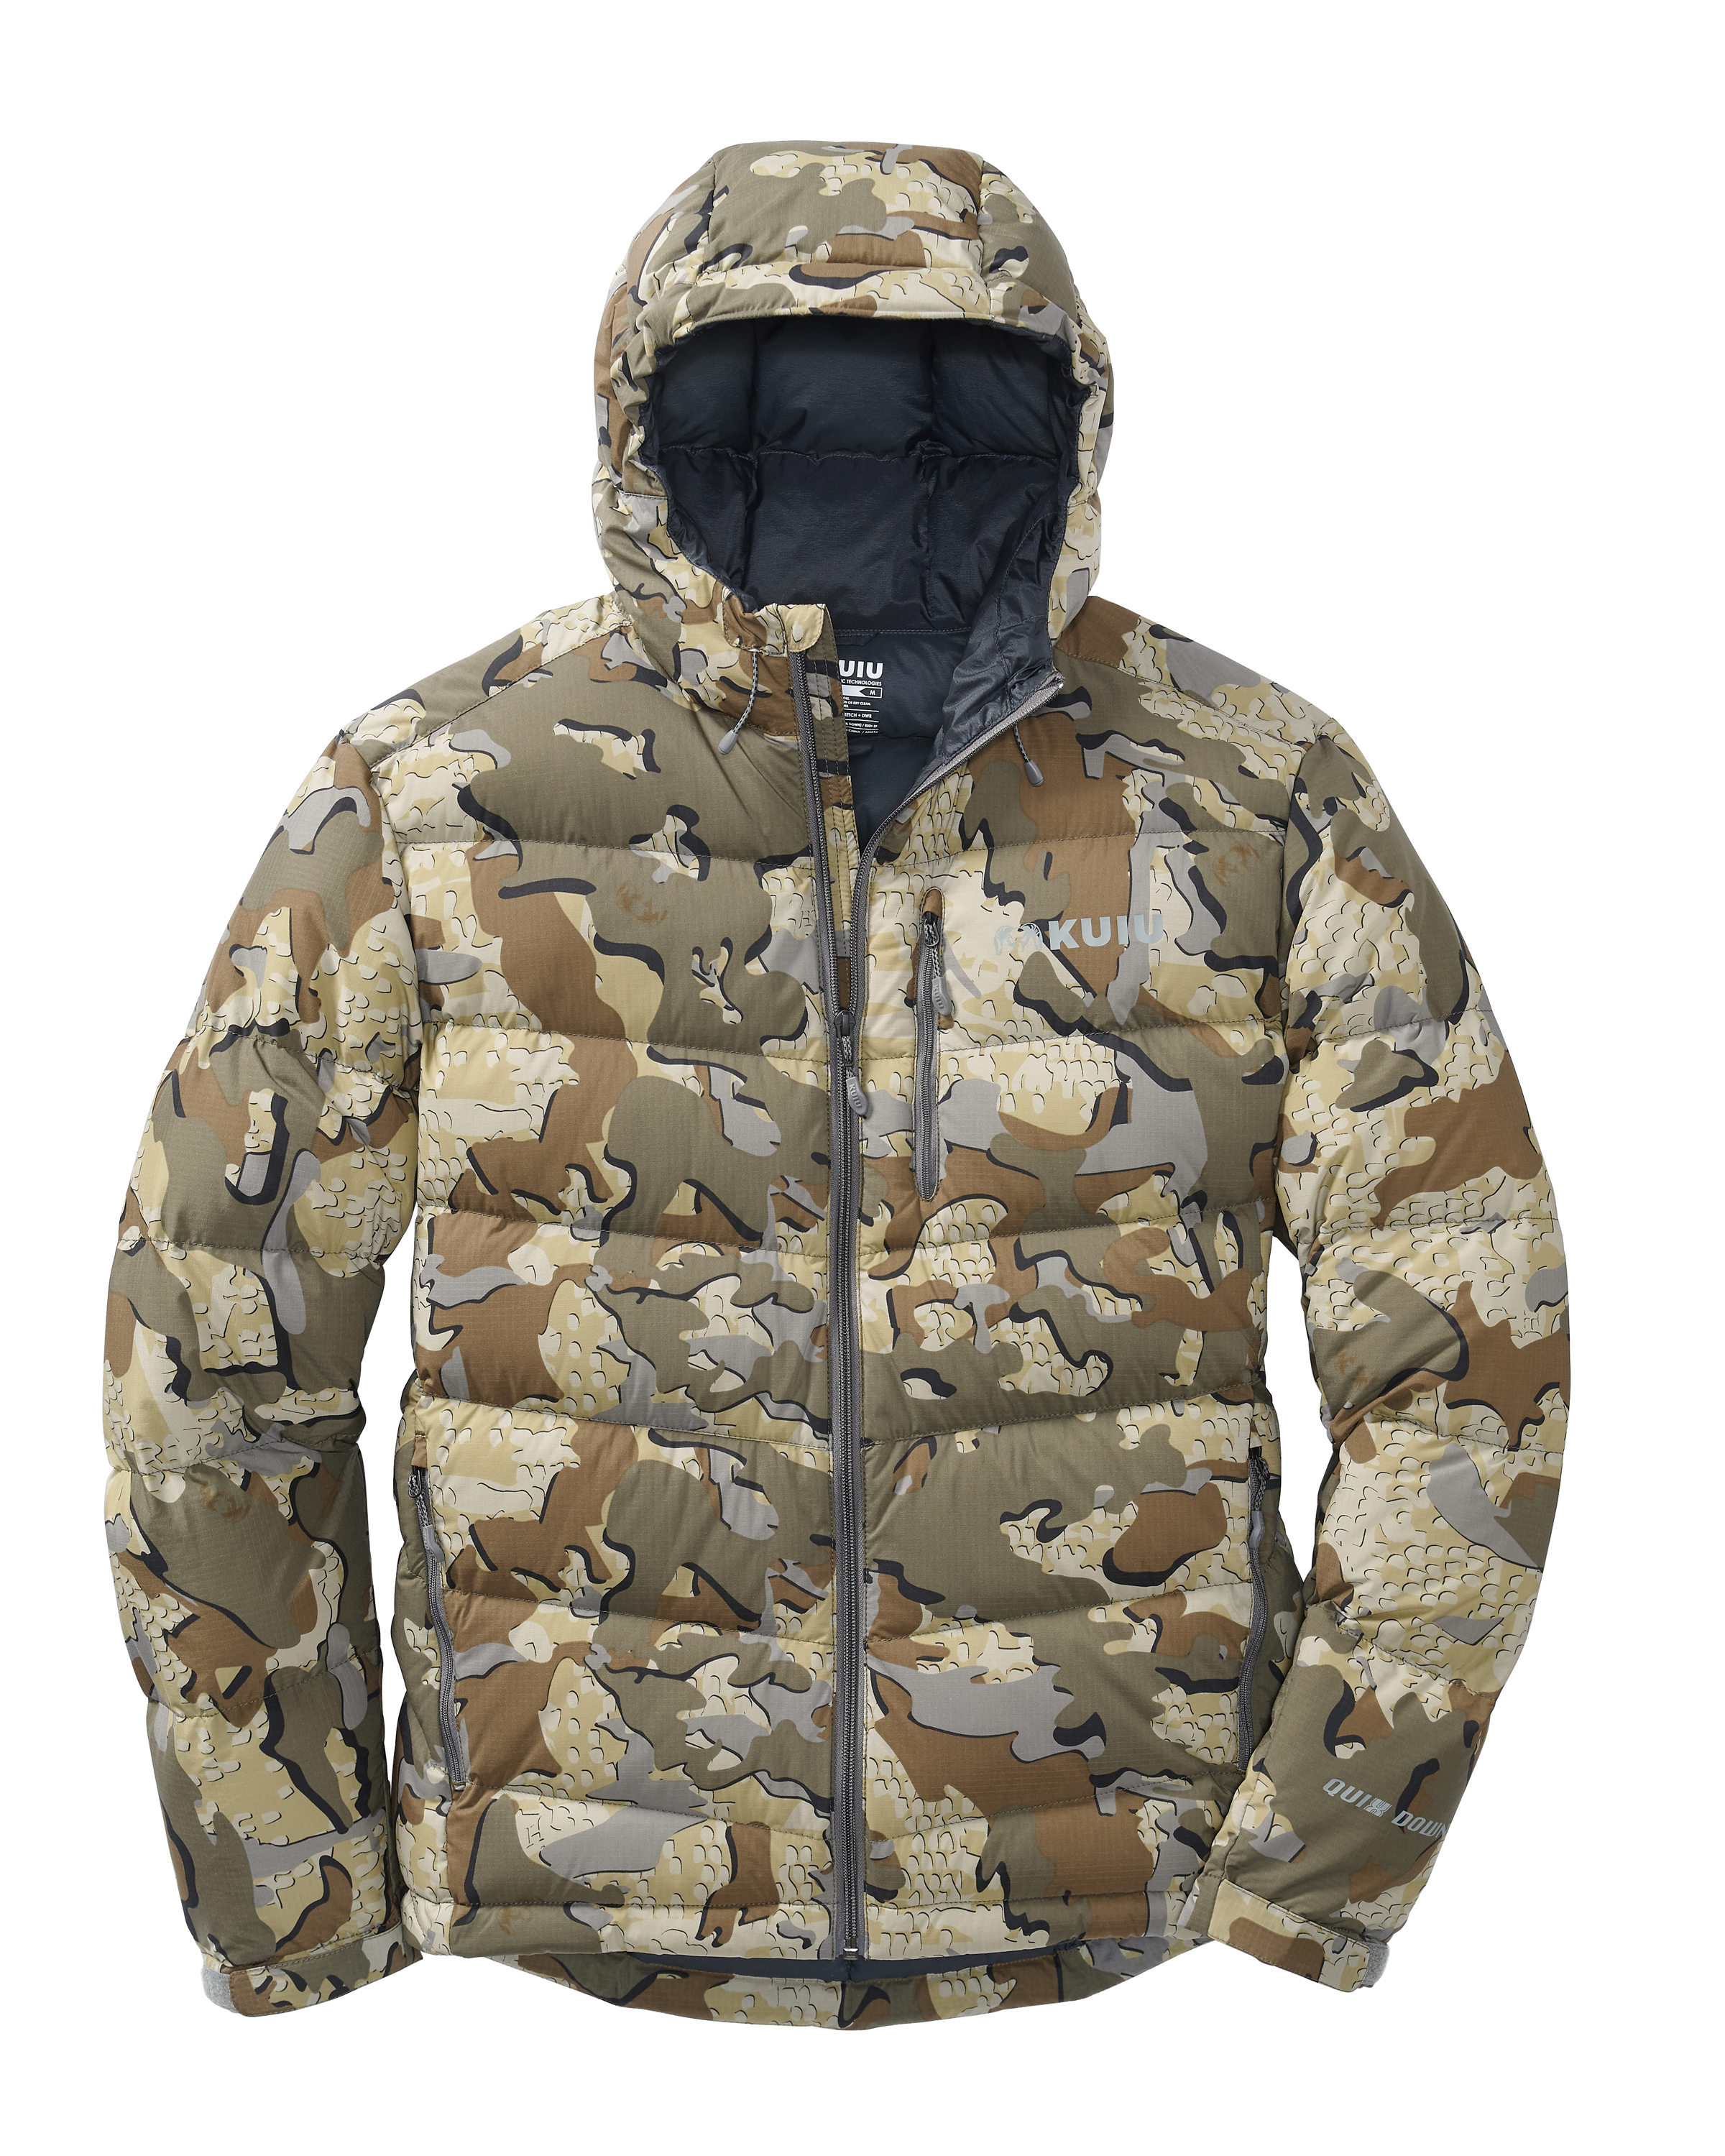 KUIU Super Down PRO Hooded Hunting Jacket in Valo | Size 2XL